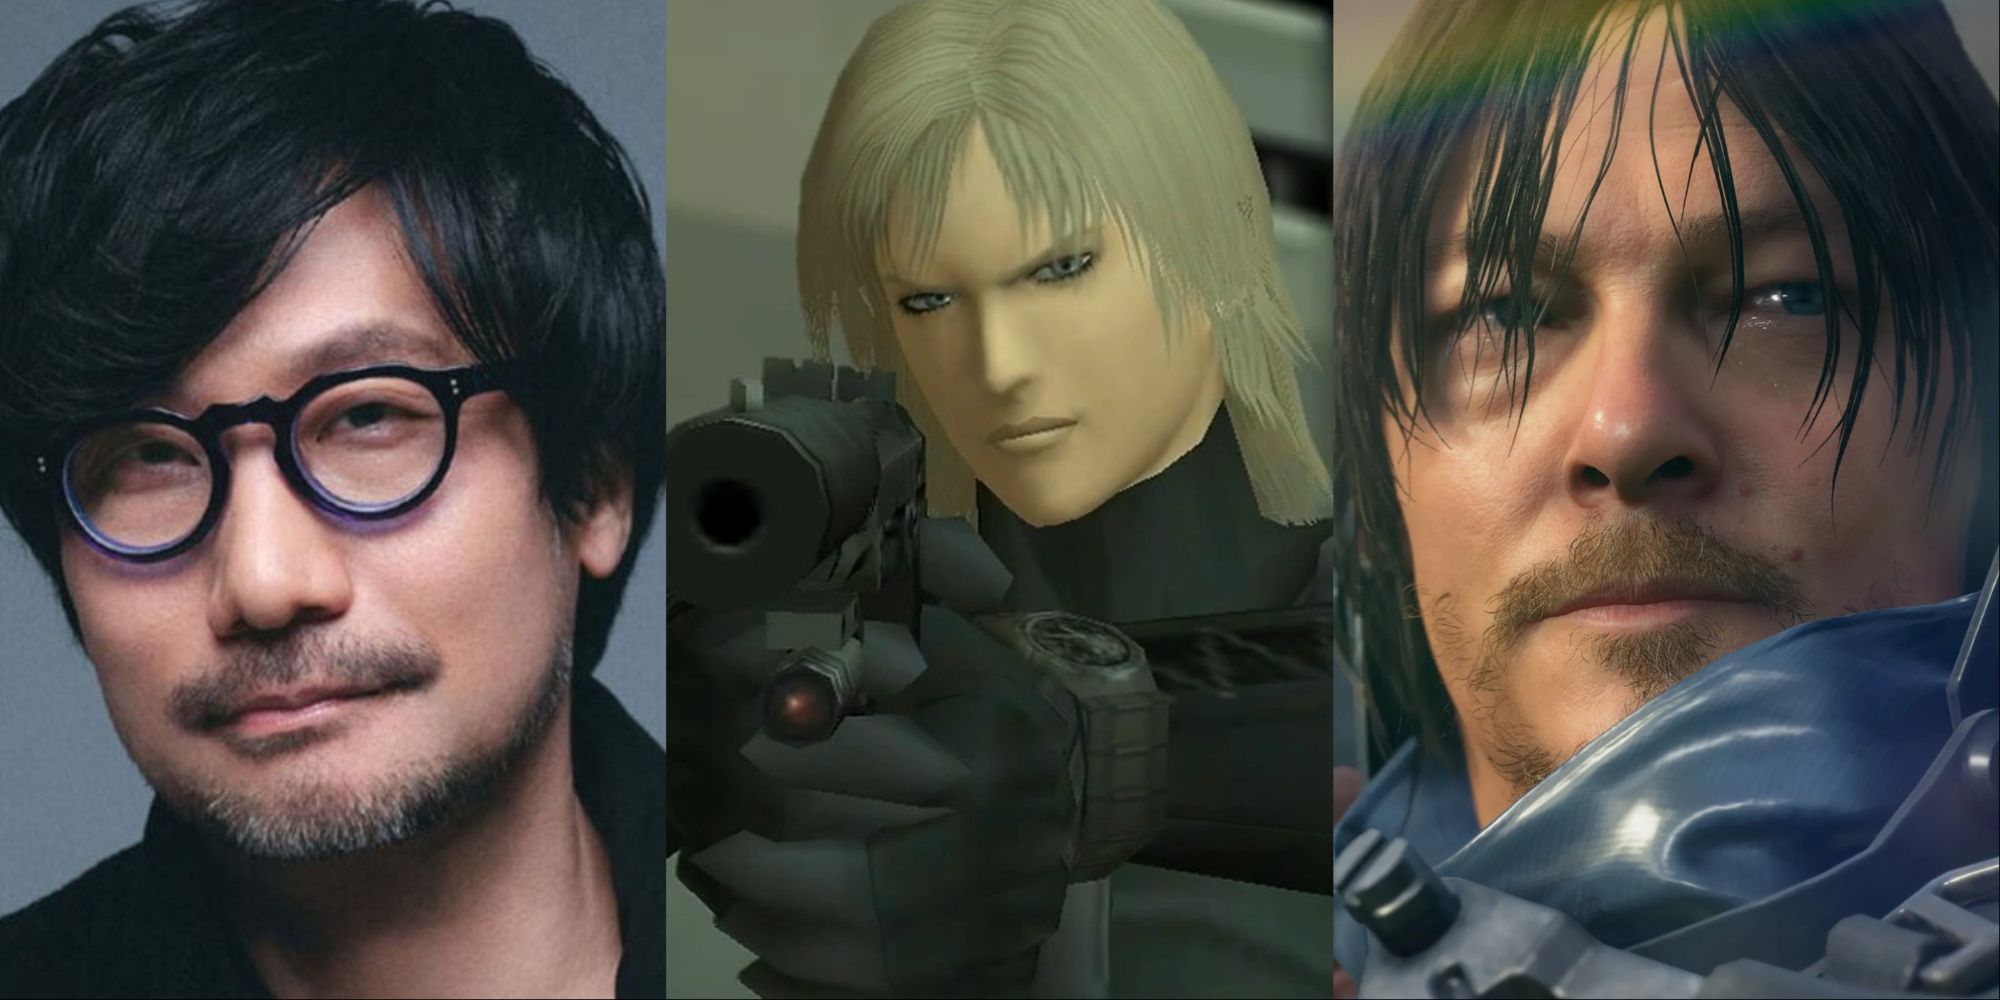 A collage showing Hideo Kojima, Raiden from MGS 2, and Sam from Death Stranding.